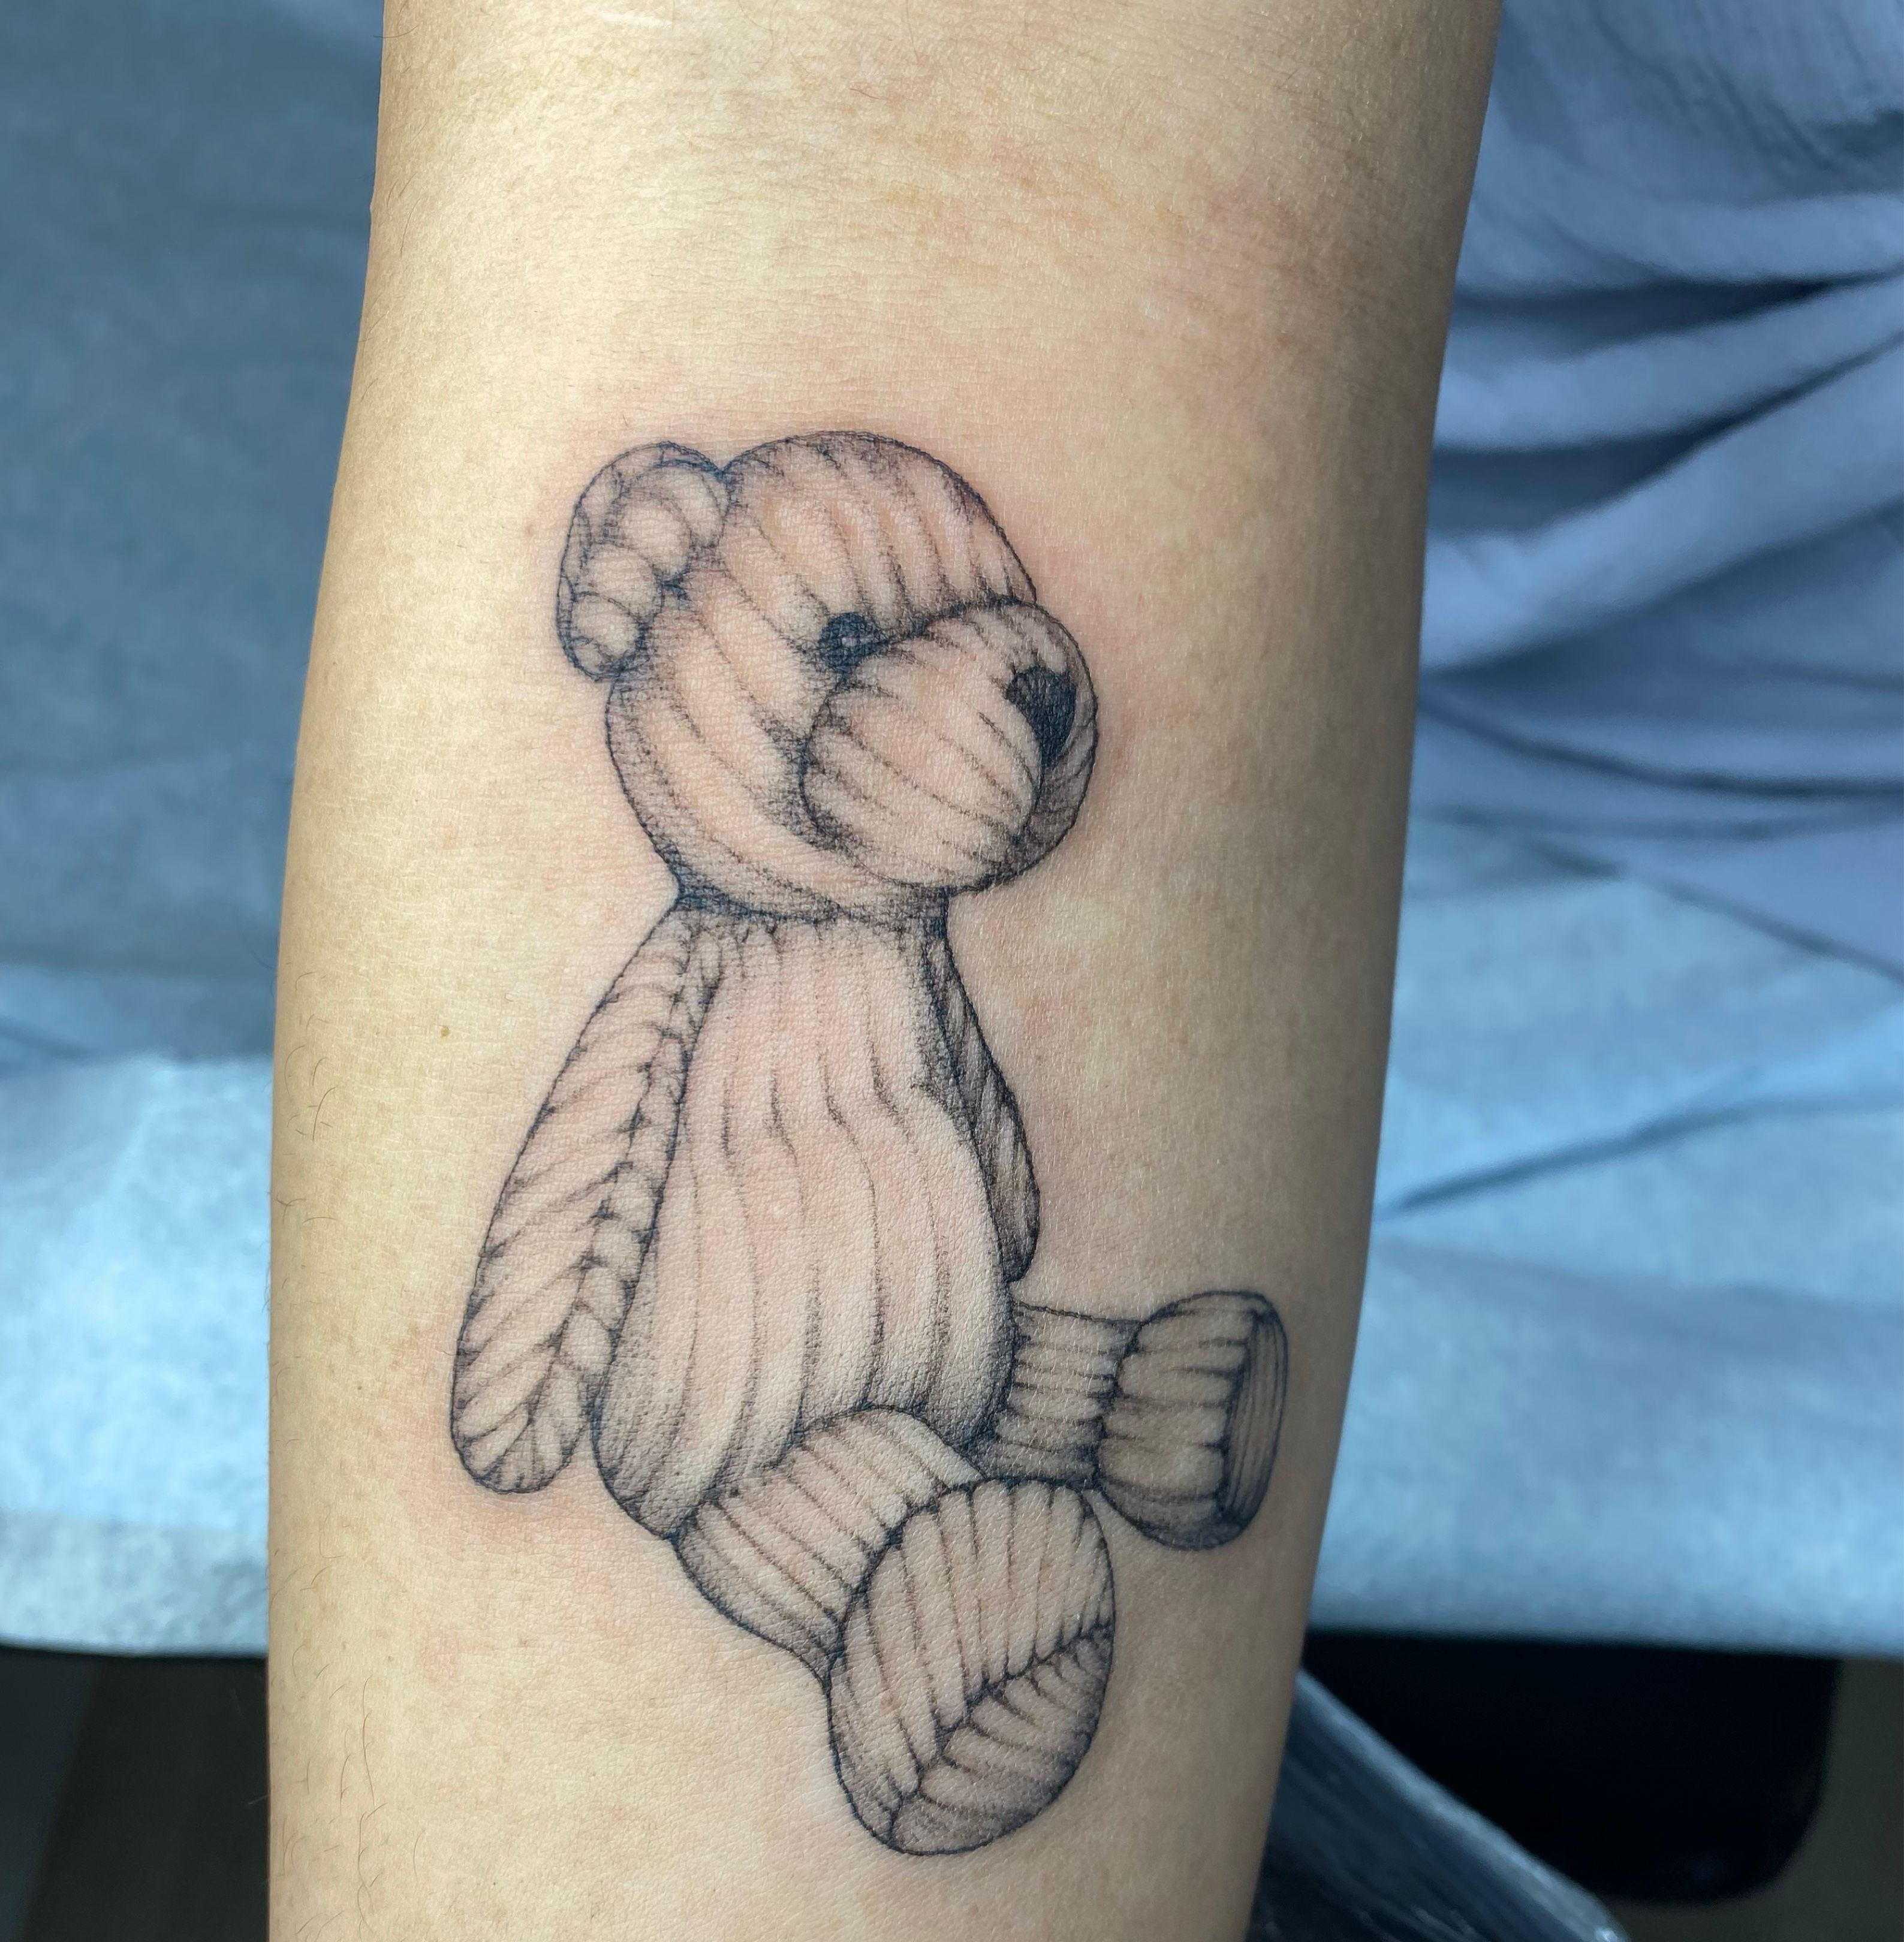 Fresh + healed :) I'll never get over how cute this tiny teddy bear is 🧸  Also sneak peek about books 🤗 More details to come o... | Instagram